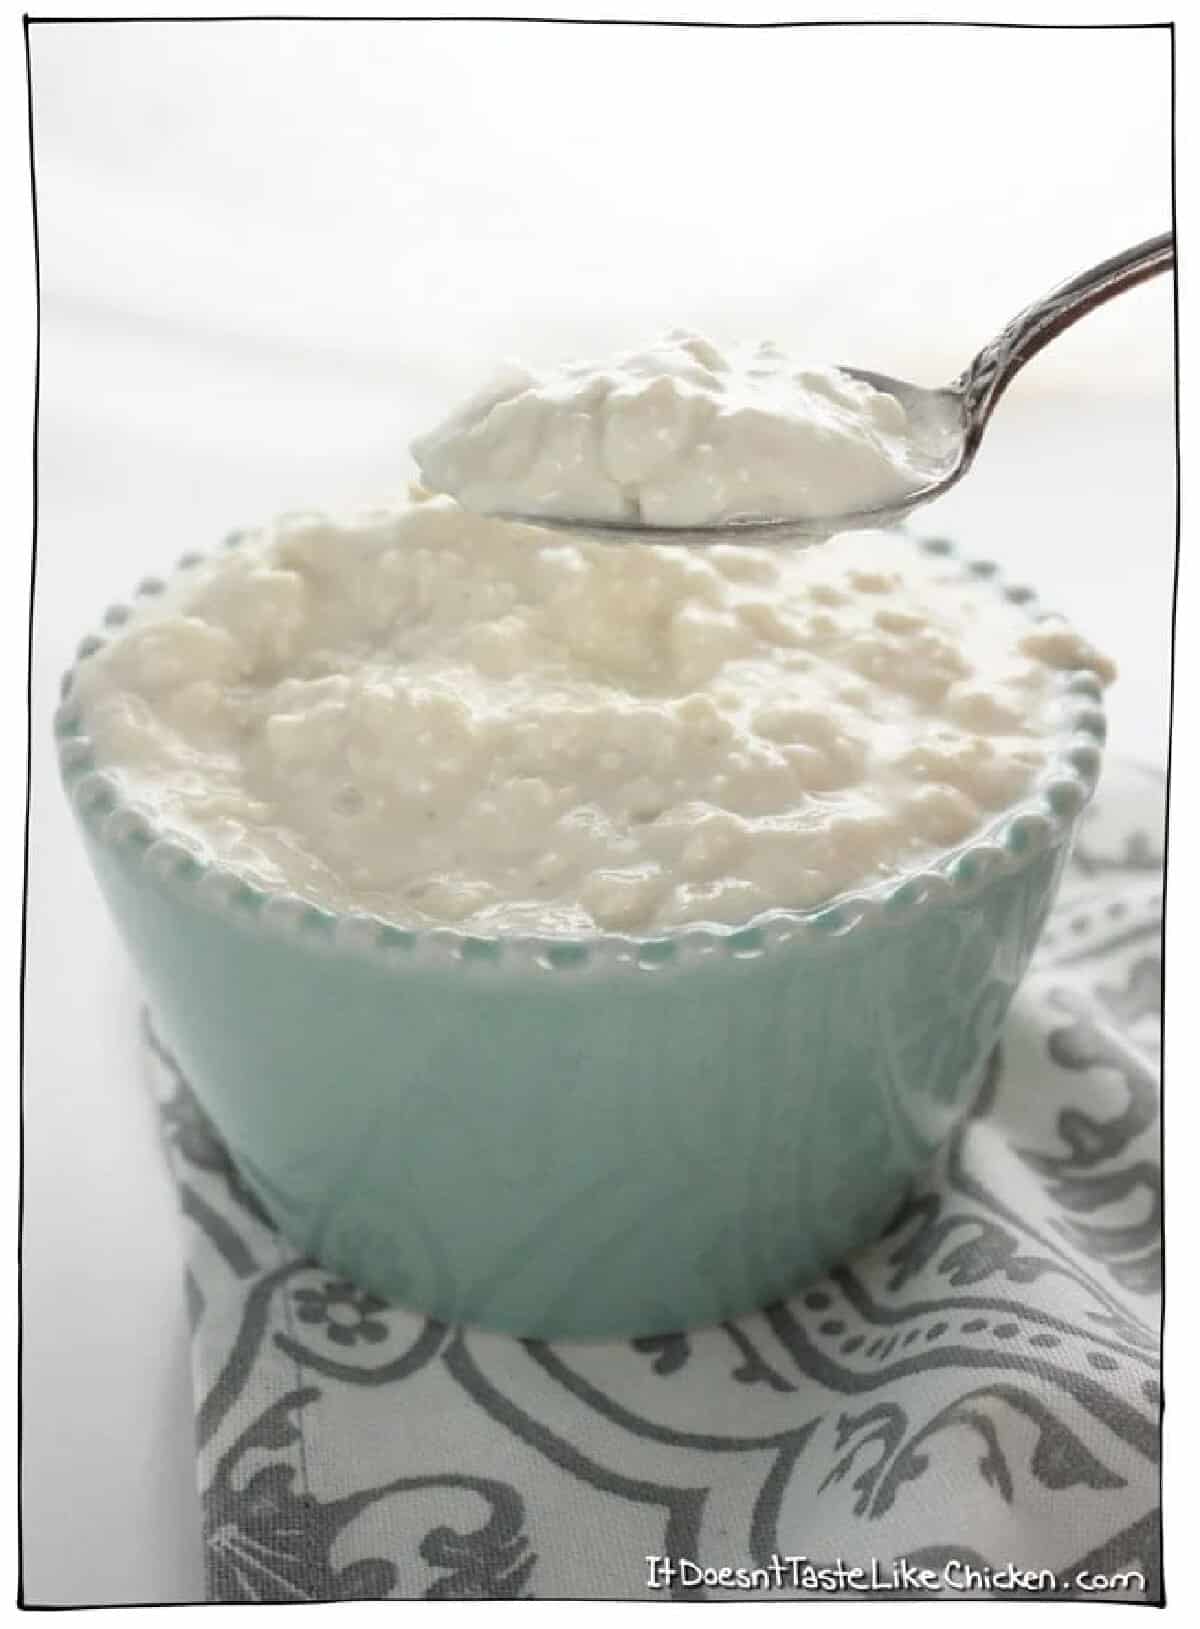 A pale turquoise bowl filled with vegan cottage cheese and a spoonful held above the bowl against a white background and displayed on a white and gray patterned towel.